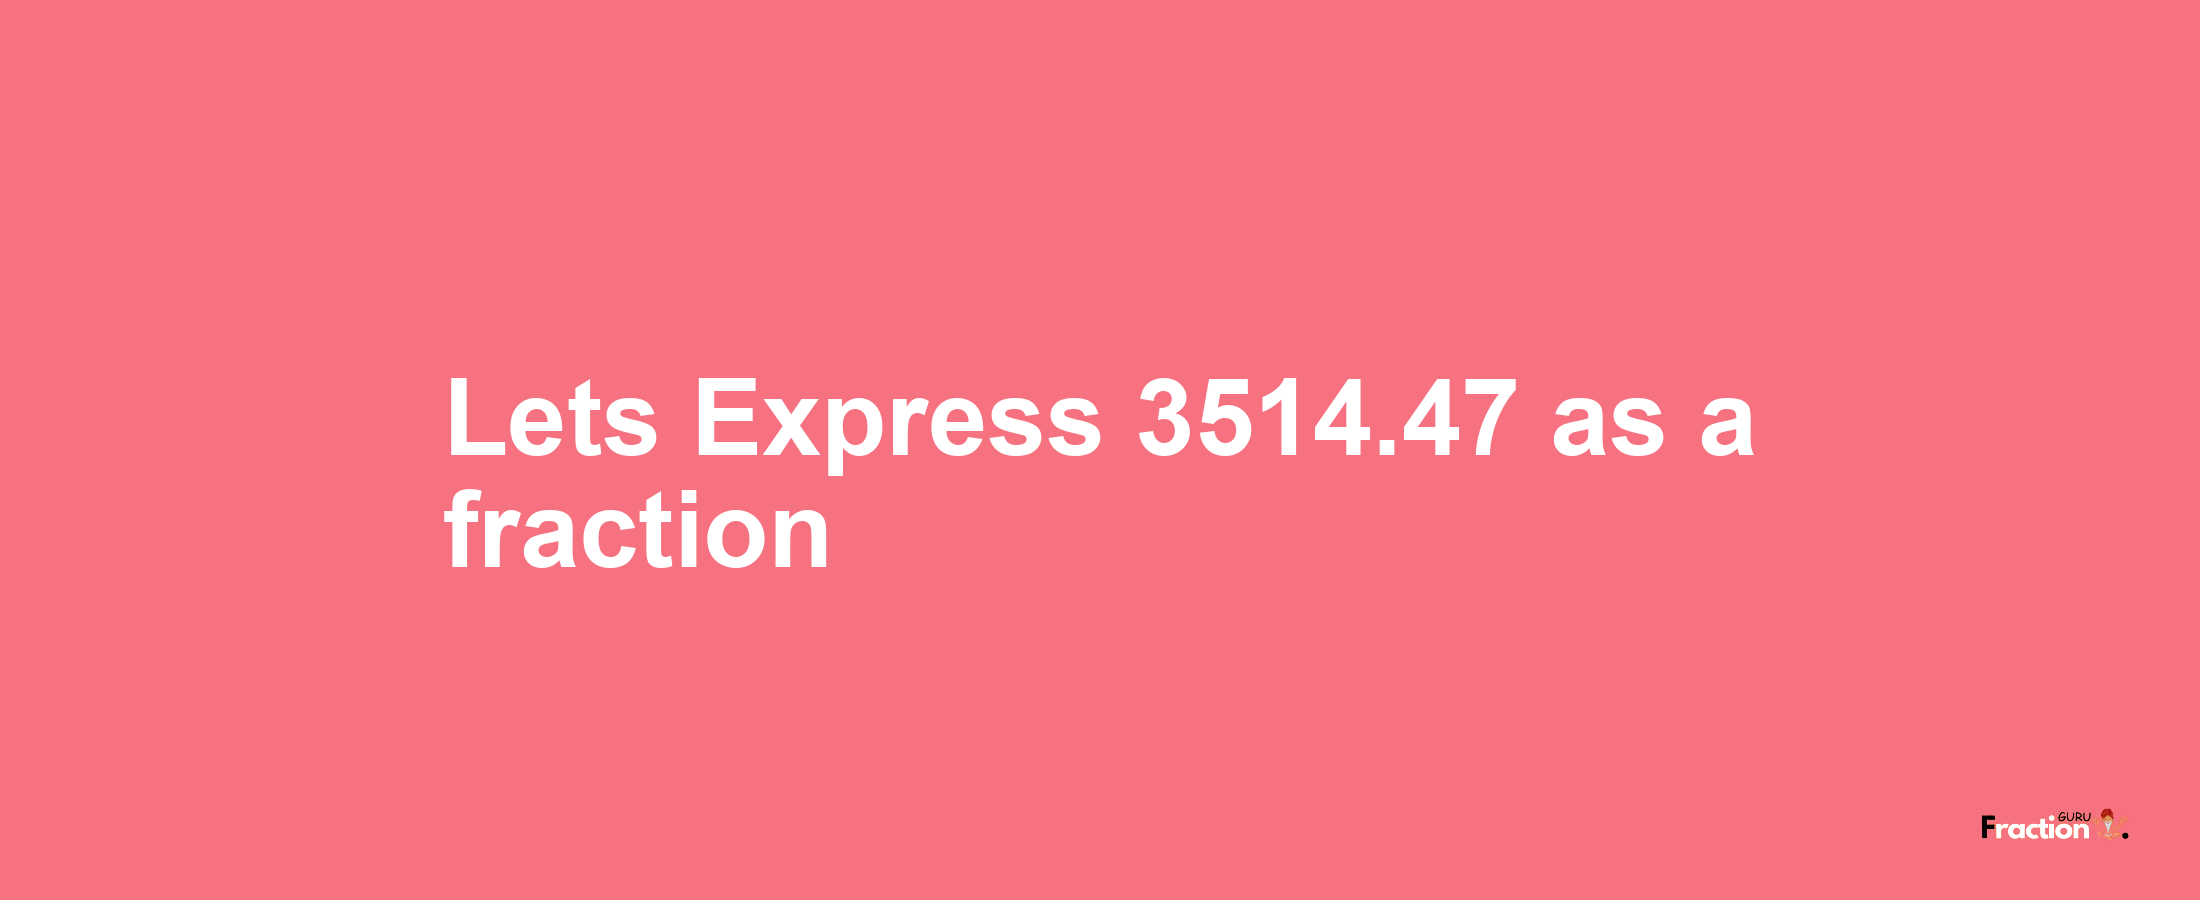 Lets Express 3514.47 as afraction